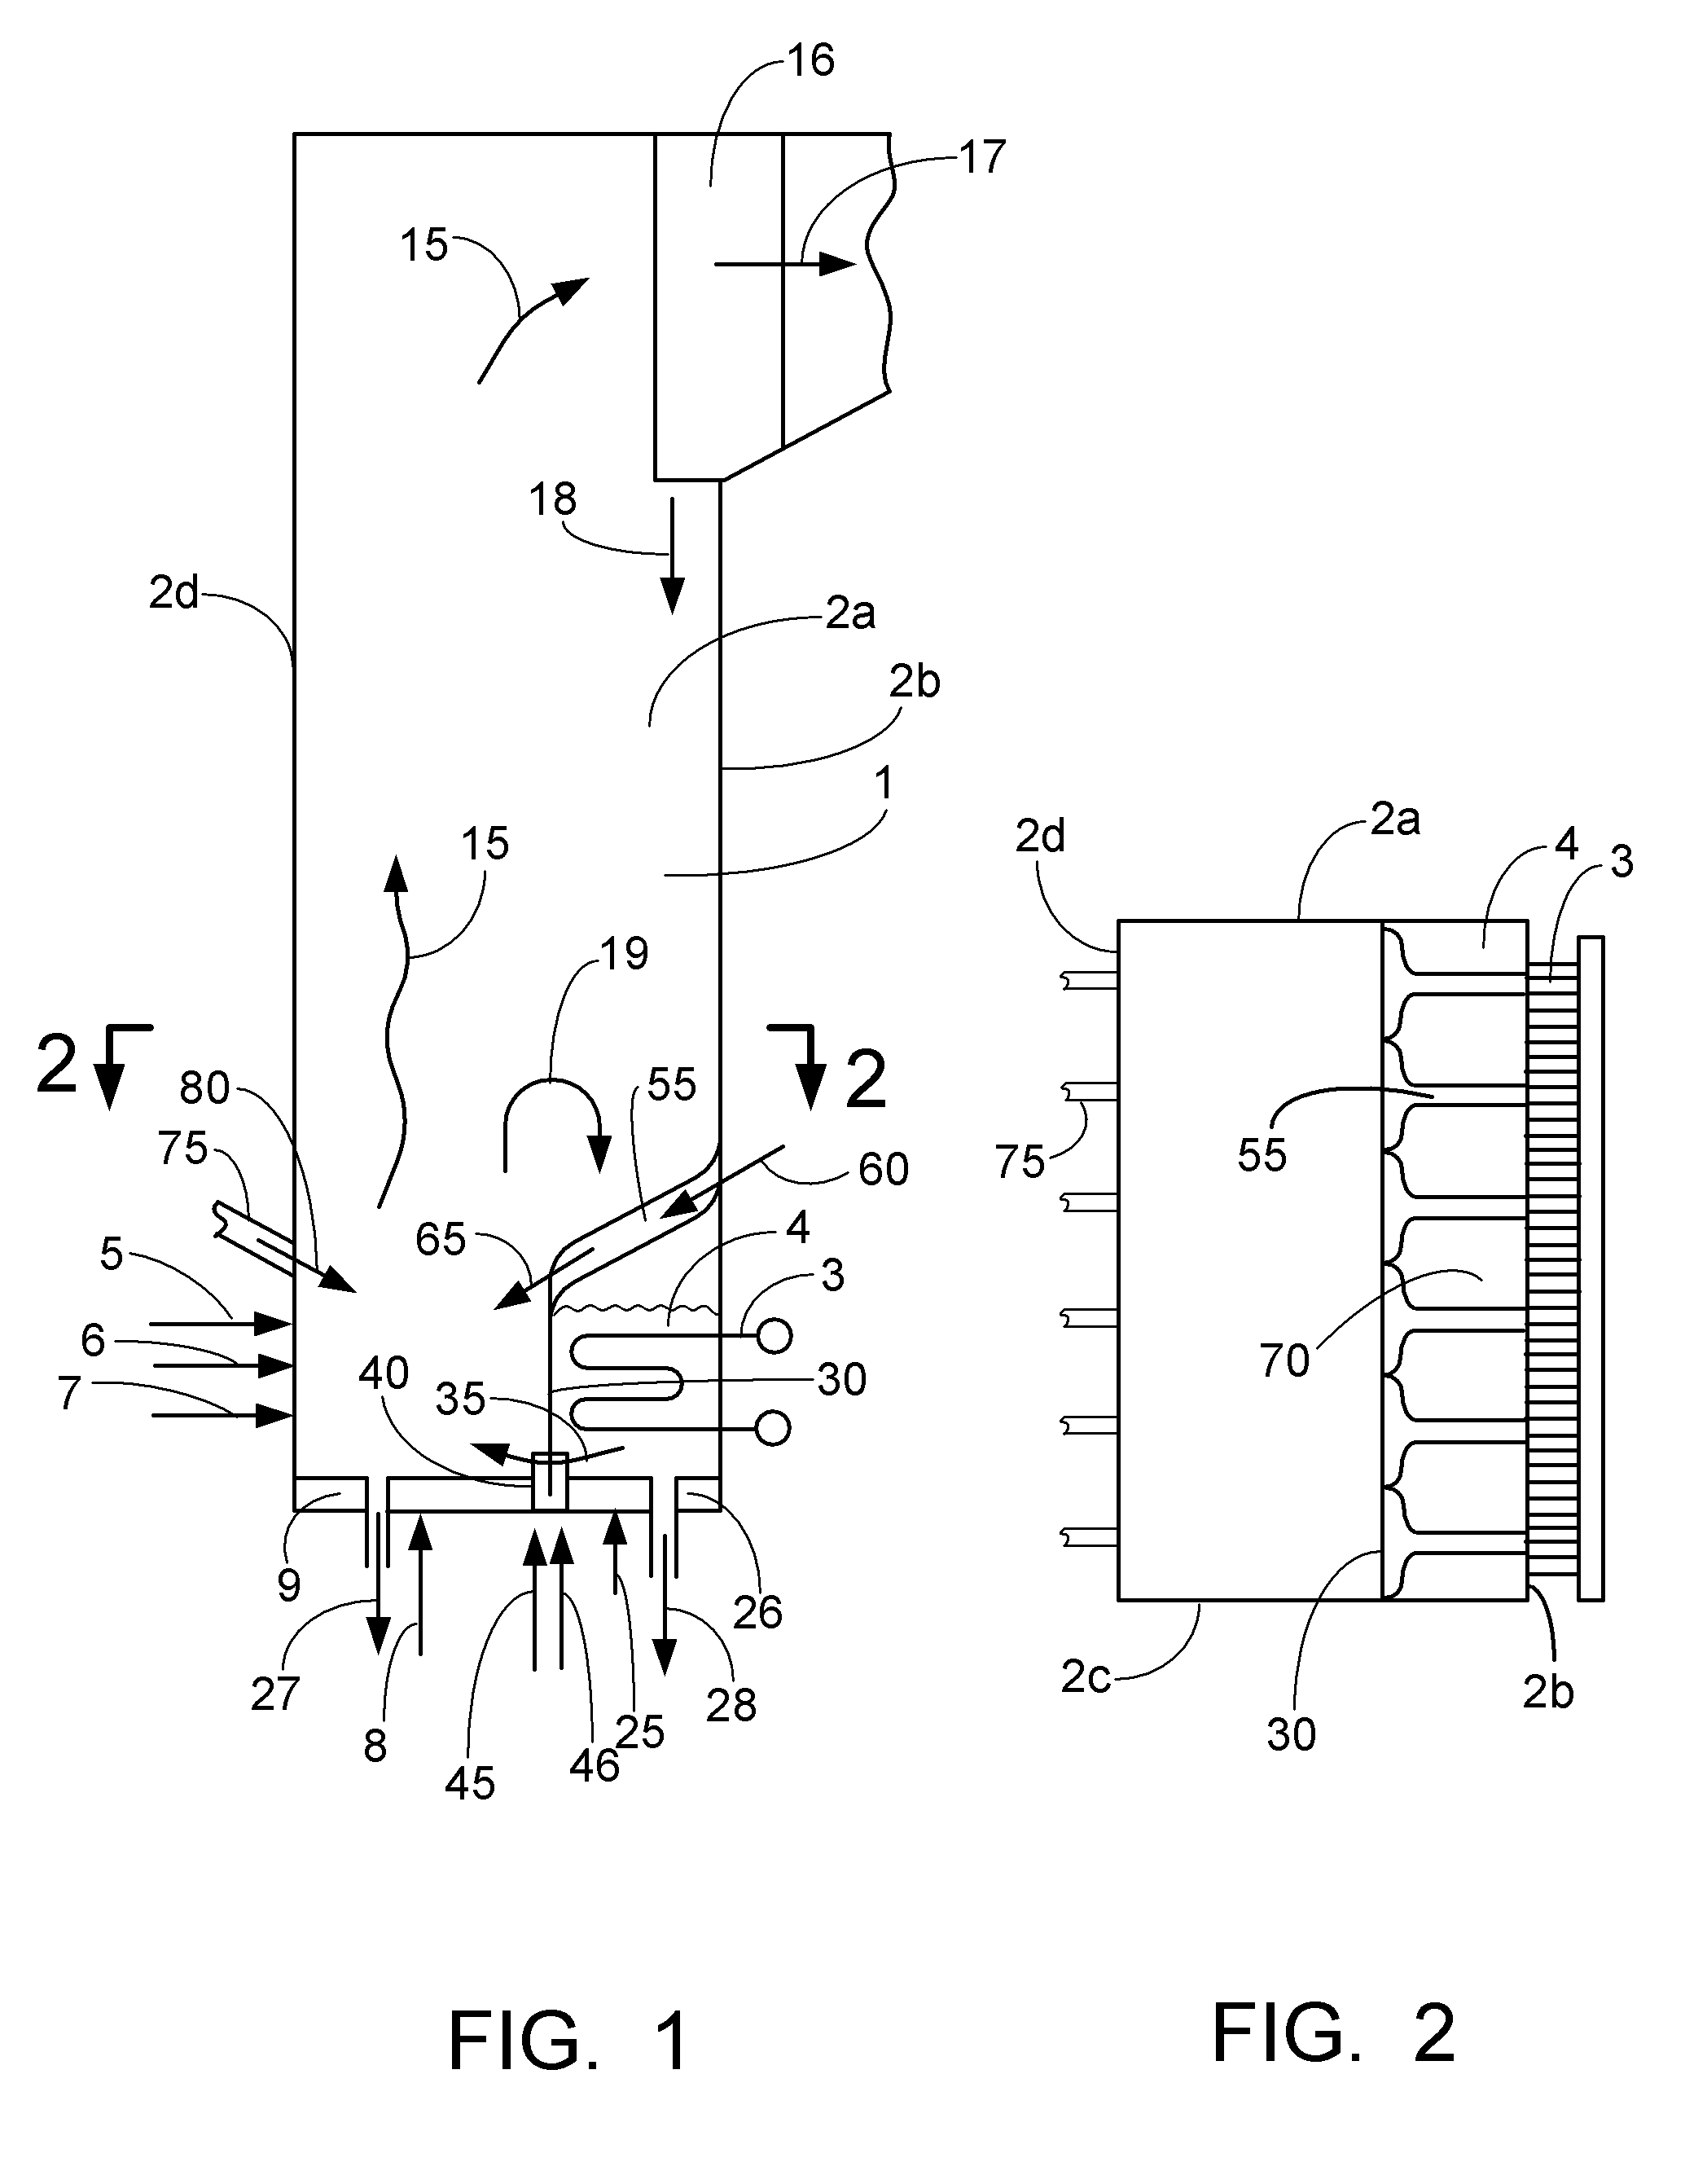 In-bed solids control valve